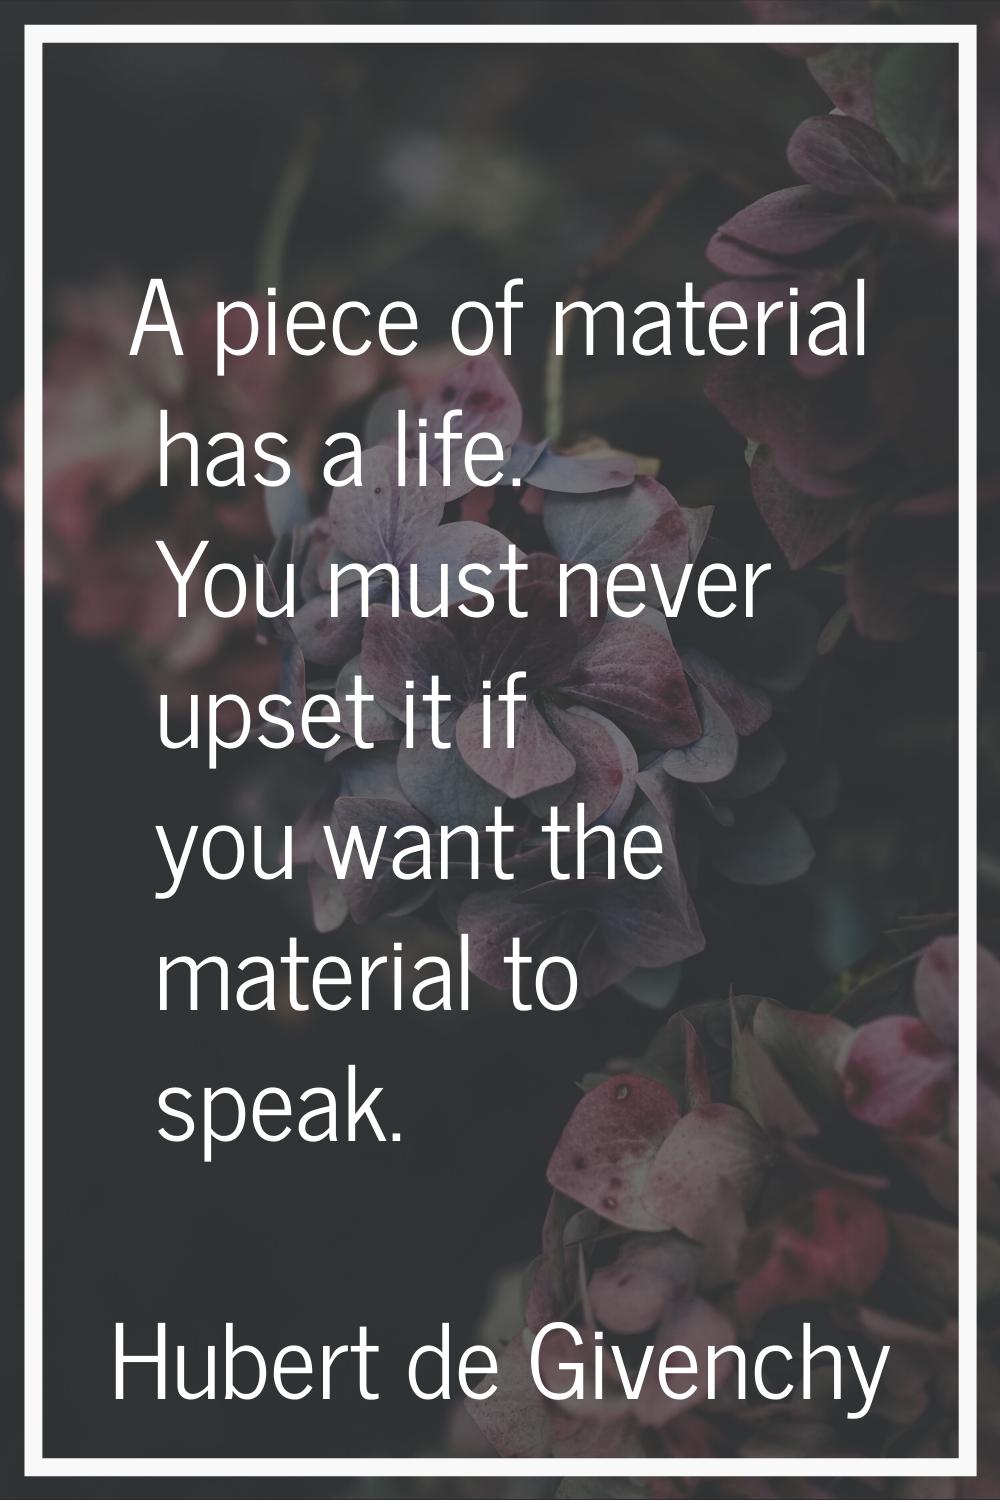 A piece of material has a life. You must never upset it if you want the material to speak.